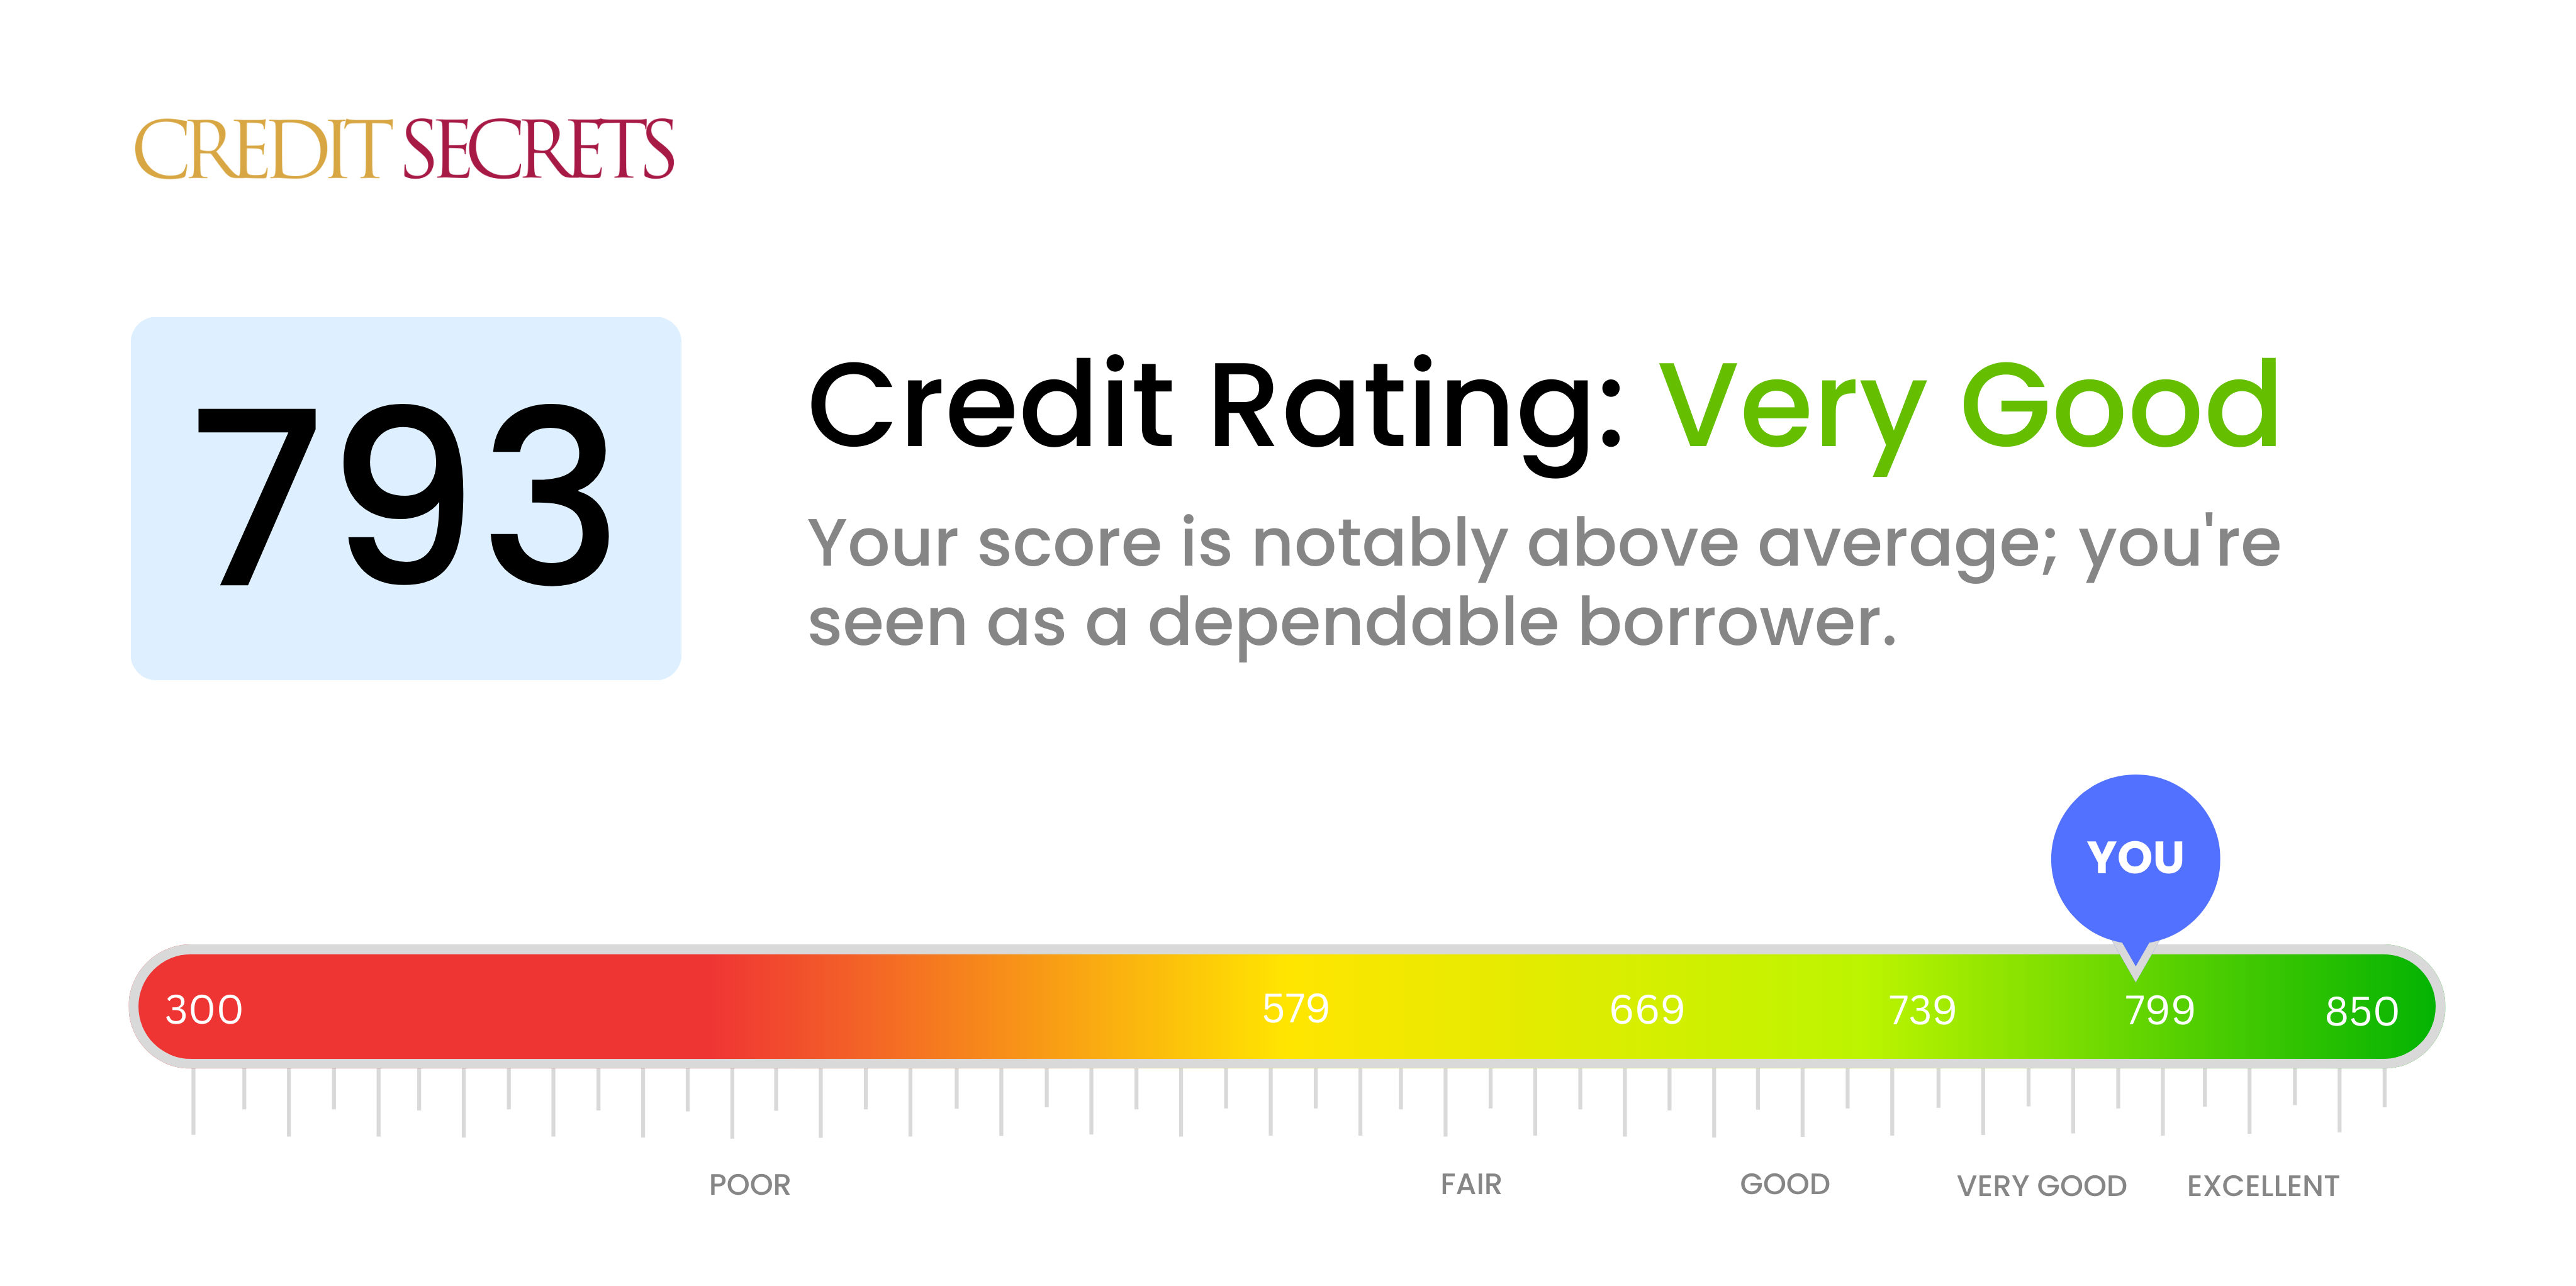 Is 793 a good credit score?